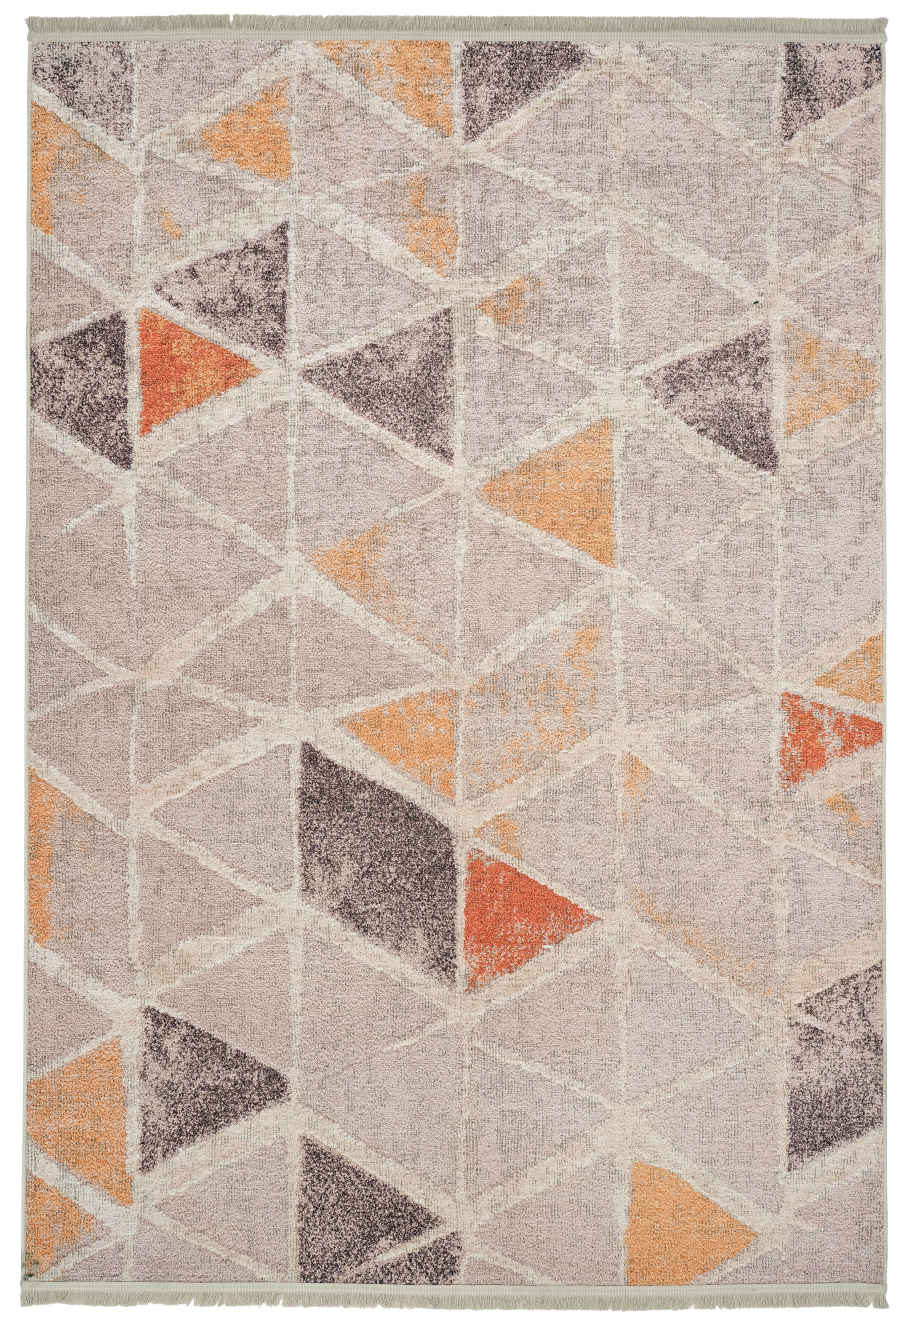 Area rug | Chennie Chic Tryme |5x8 |3x8 Runner | By MotherRuggers.com | Machine Washable | Chenille Woven | Gemetric print | Triangle Design | Splash of Burnt Orange | Splash of Dark Brown | Splash of Yellow | Mainly Tan | Pet Friendly | Kid Friendly | Machine Wash | Line Dry | Living Room | Kitchen | Bedroom | Moderate Traffic | High Traffic mat recommended | Three-year warranty with proper care | Shake or light Vacuum | Machine Wash as needed | Dry Flat or Line Dry | Dries fast